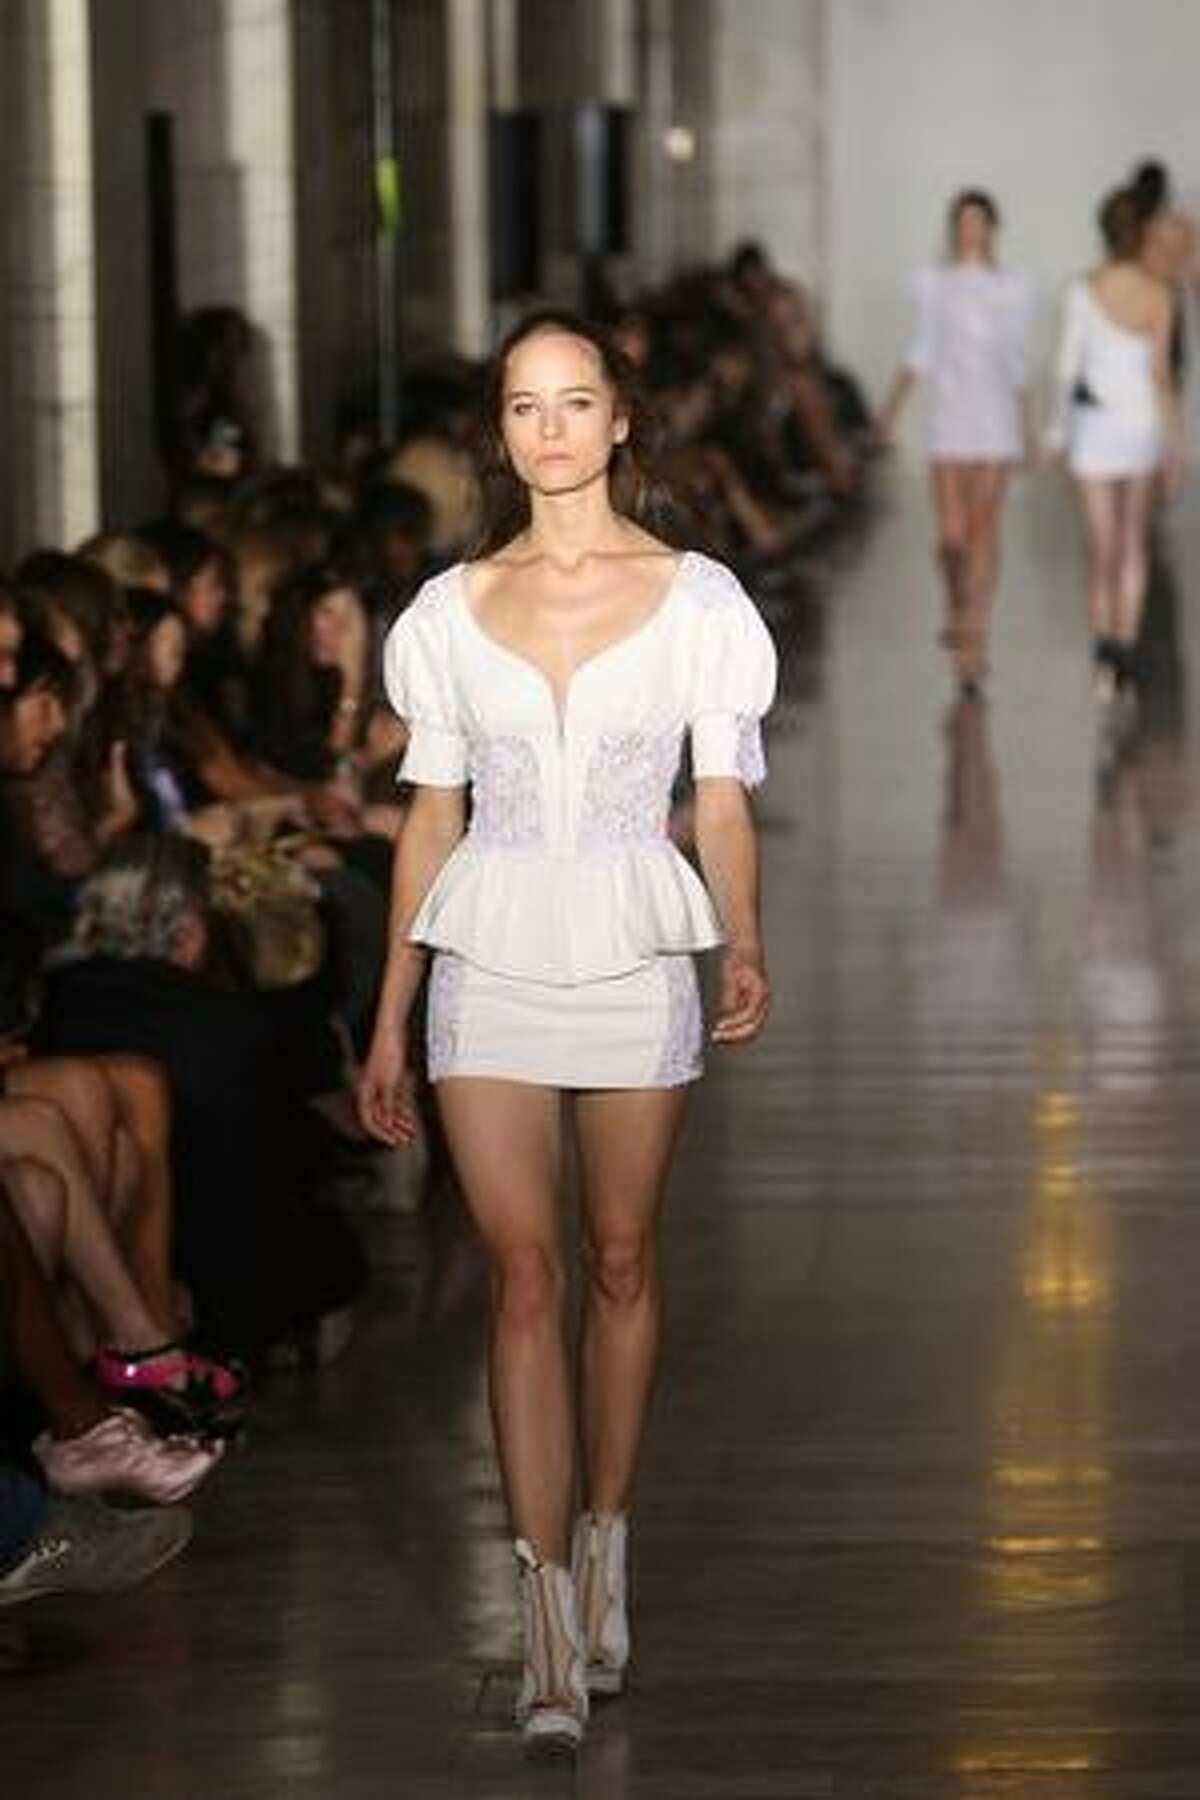 A model walks the runway at Jill Stuart Spring 2010 fashion show at The New York Public Library in New York, New York.